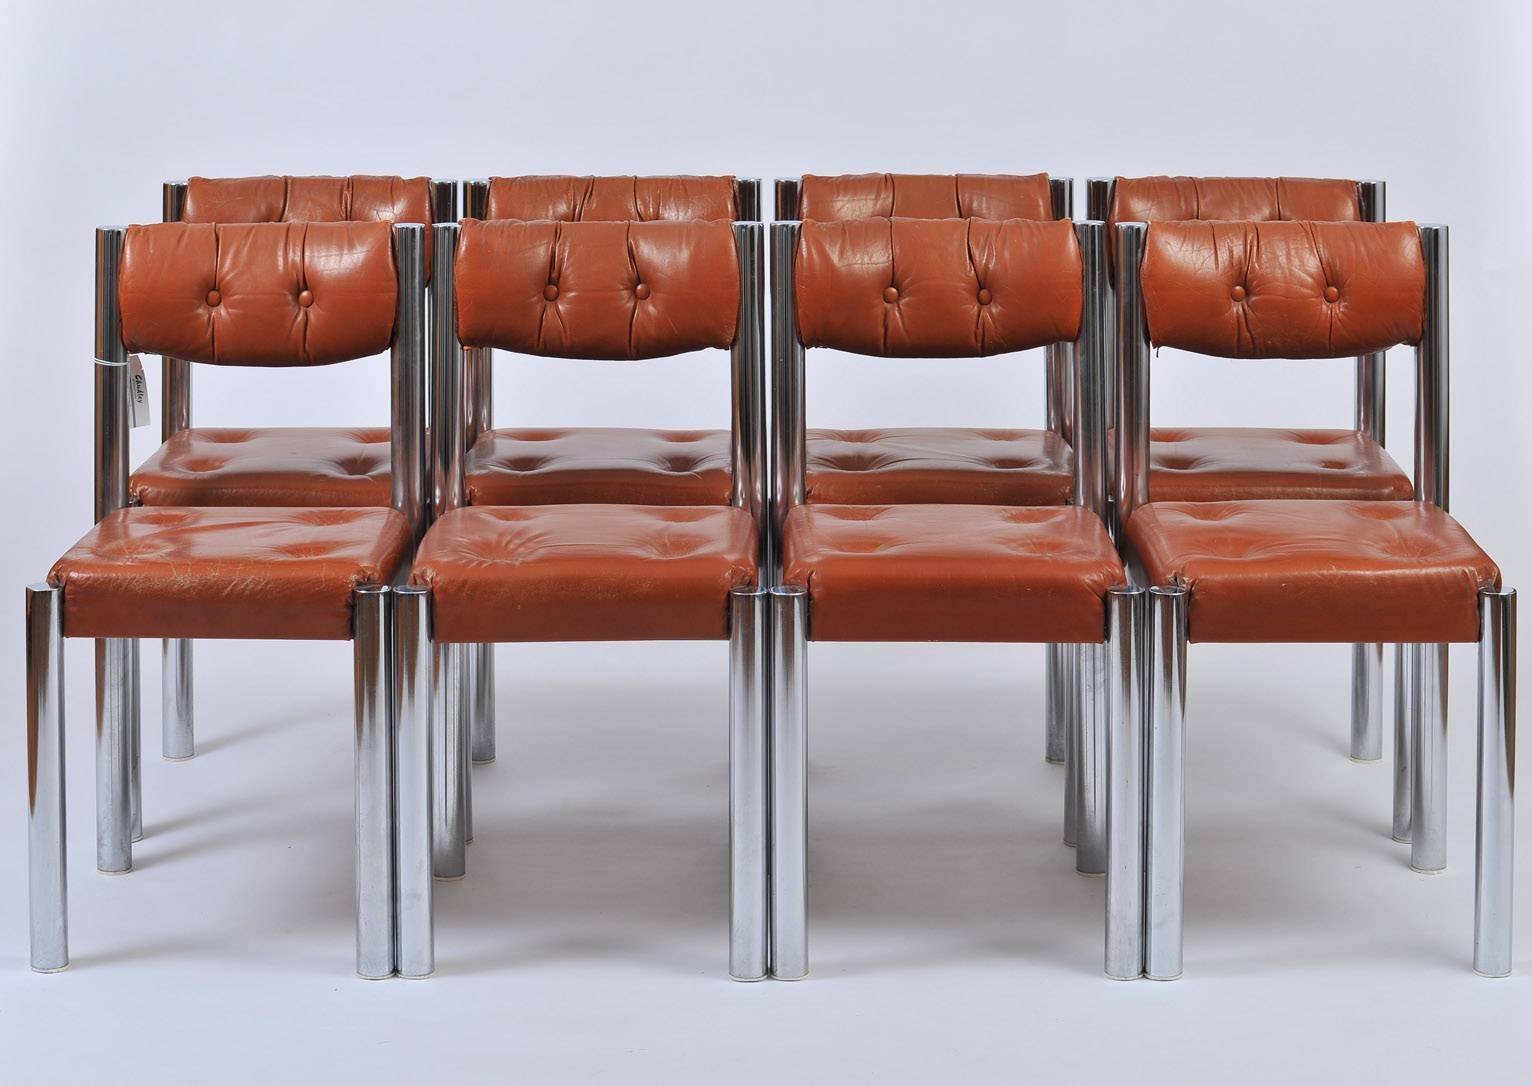 A set of eight chrome and brown leather dining chairs, the polished chrome frames supporting very comfortable padded buttoned seats and backs,
France, circa 1970.